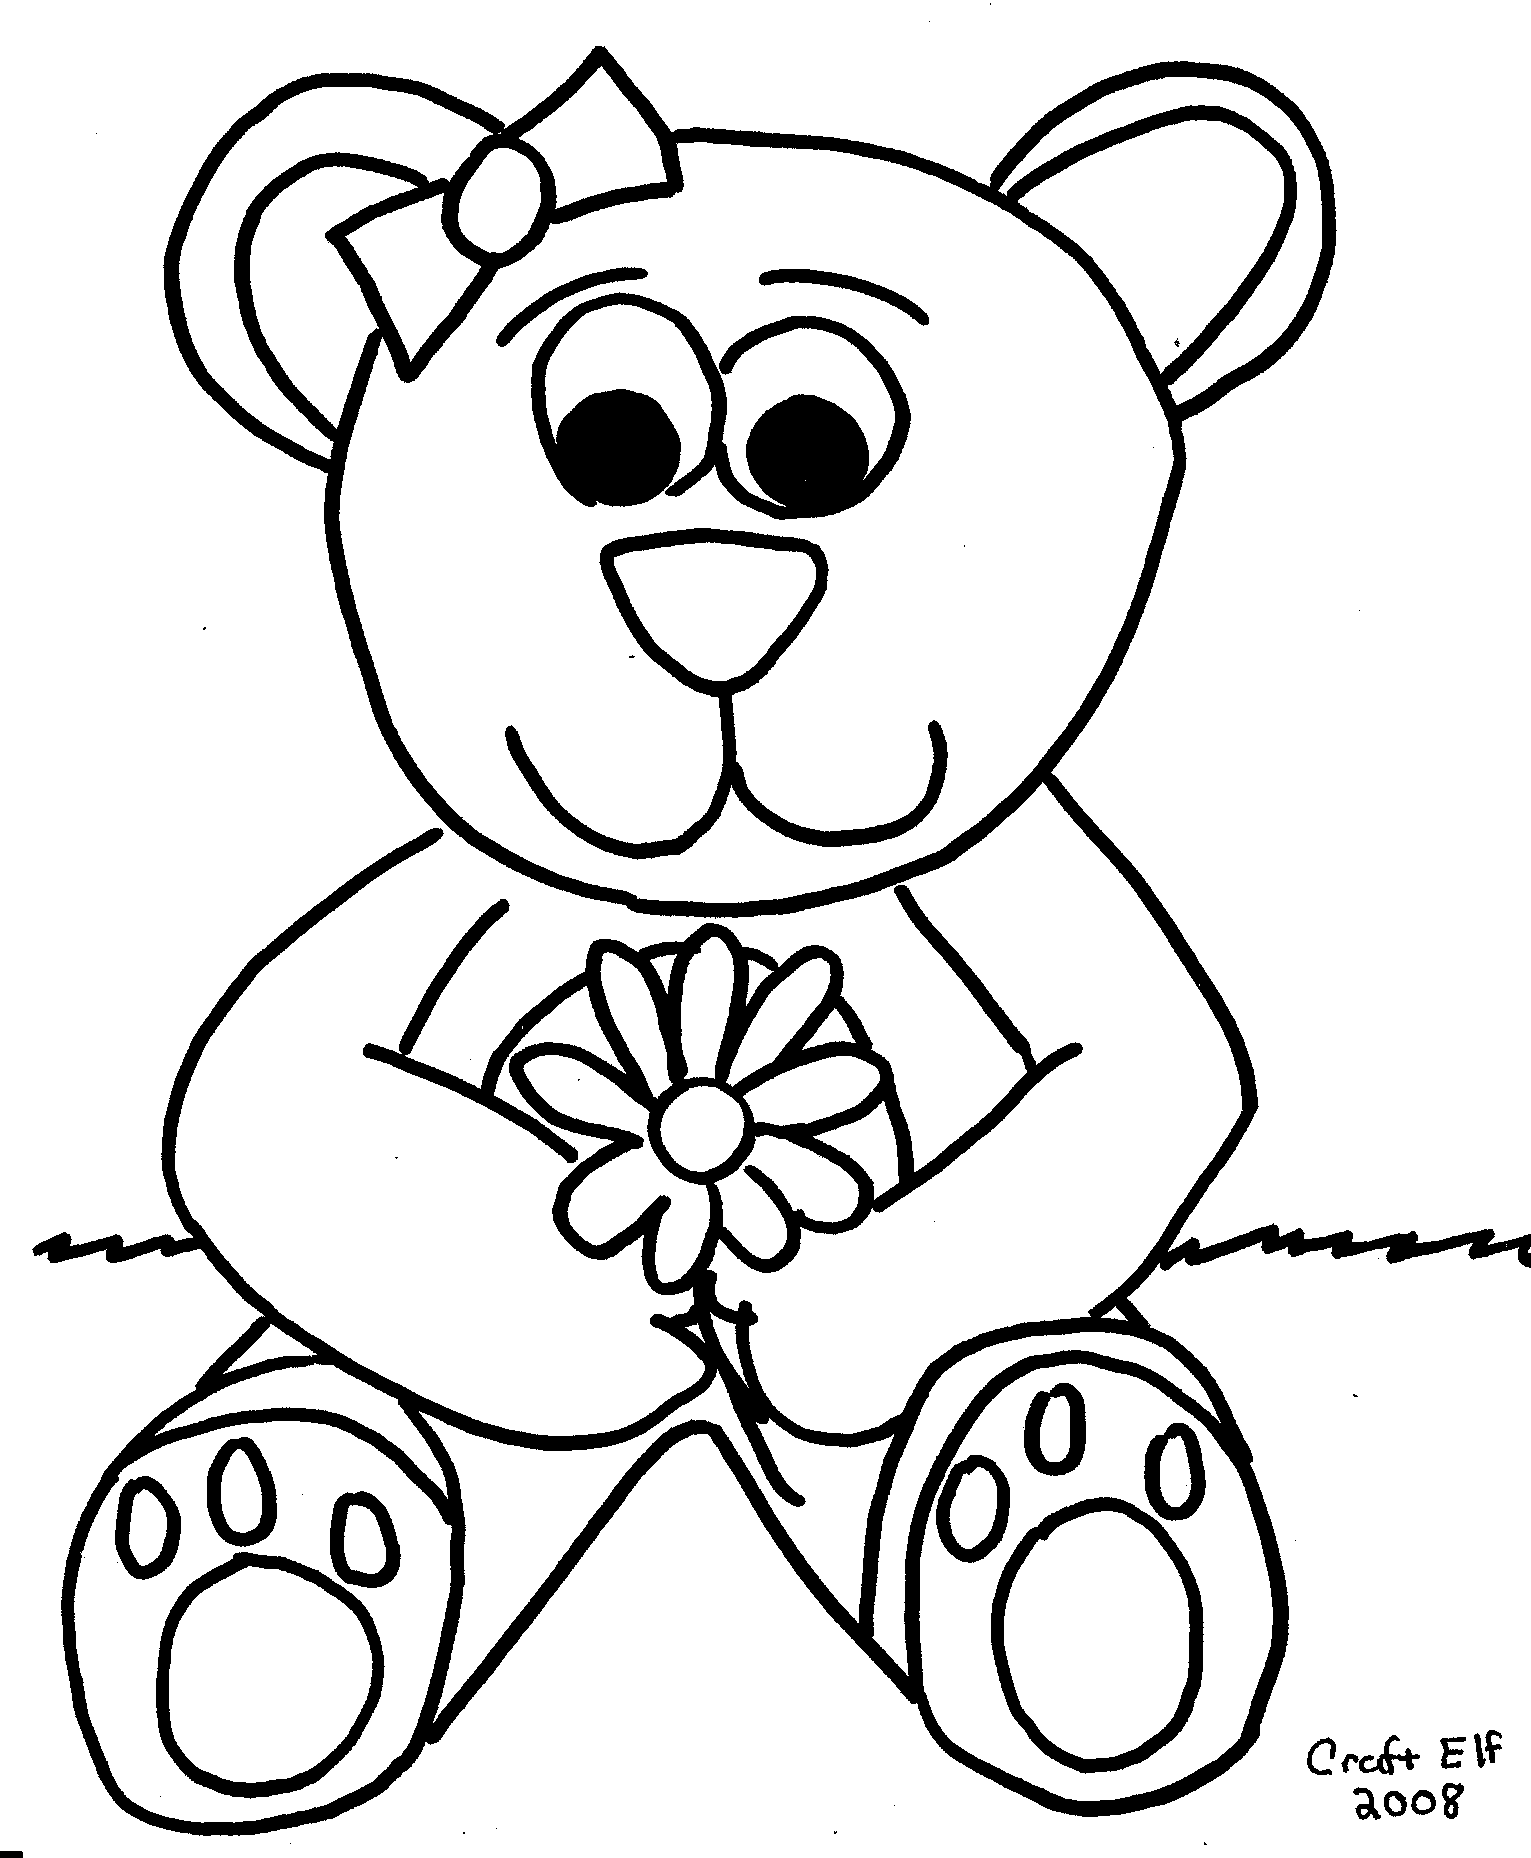 great kids activity with crayons color a teddy bear